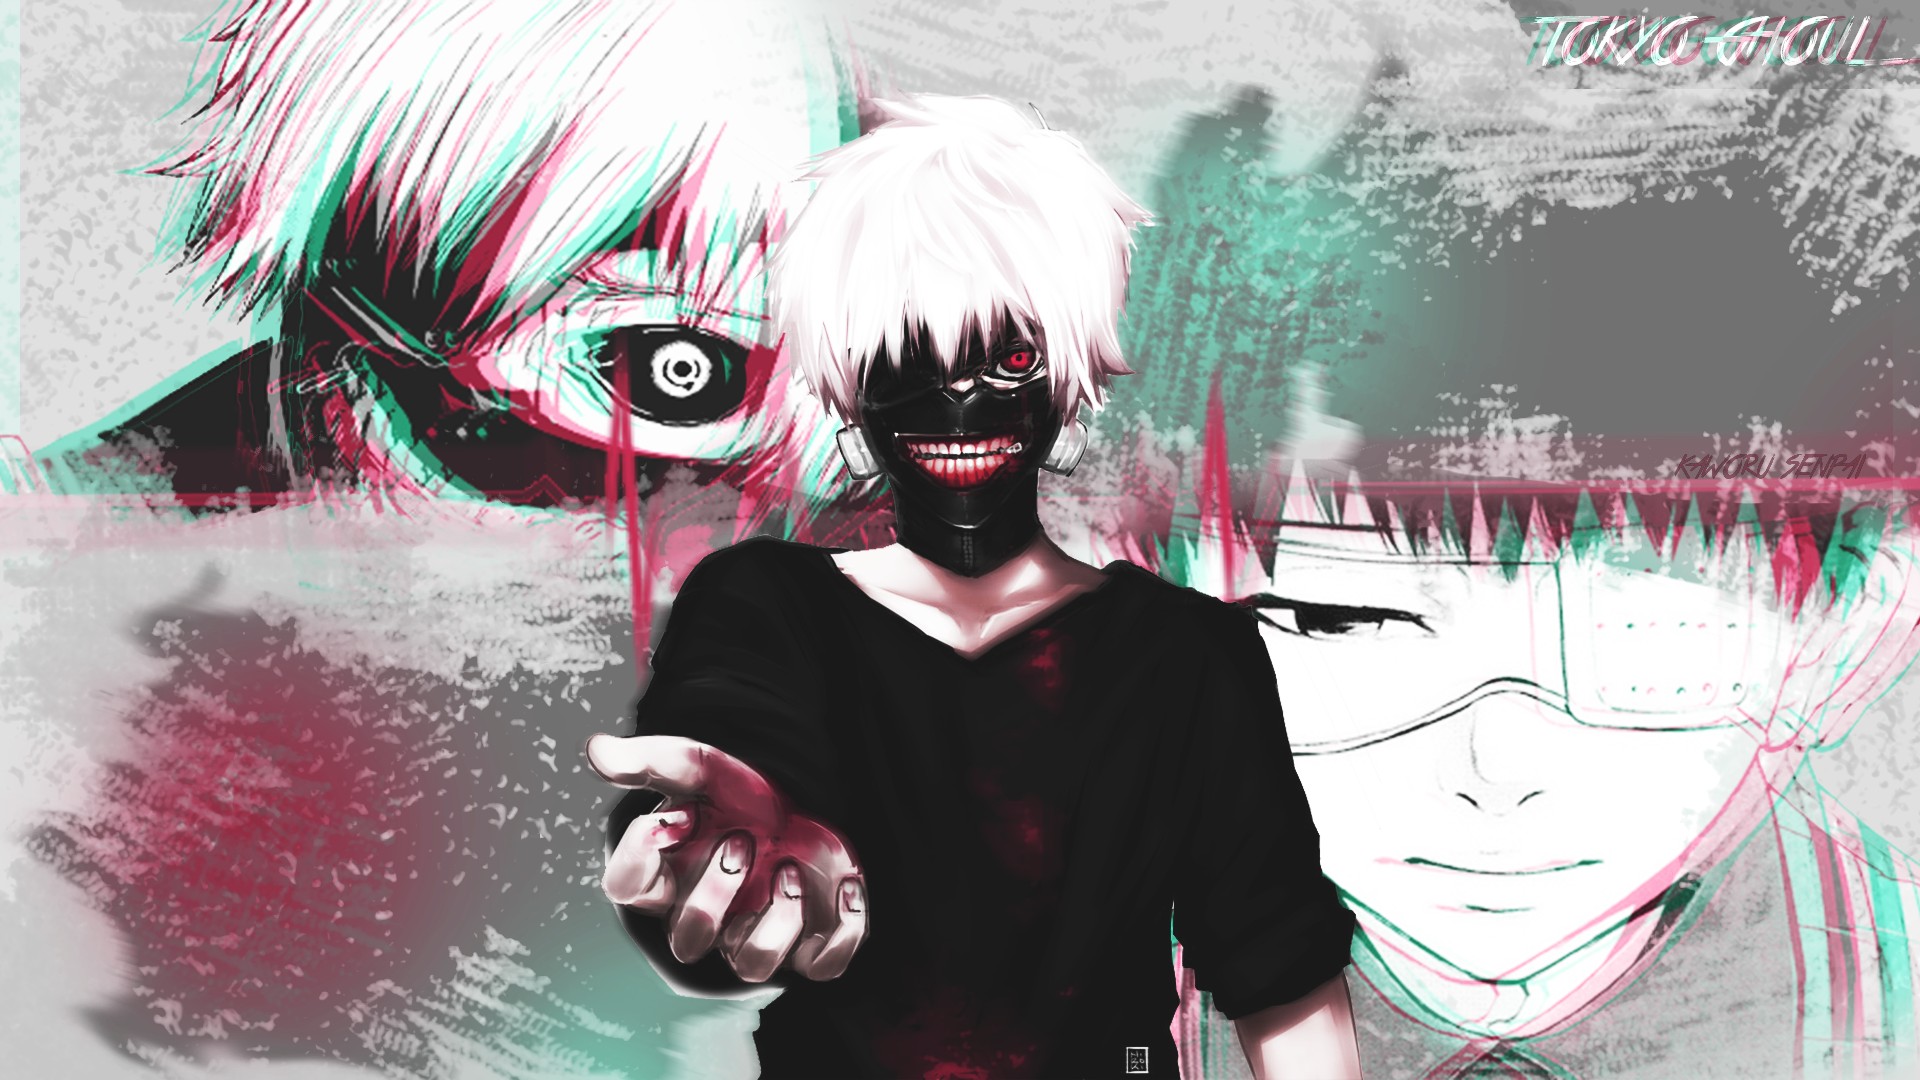  Tokyo  Ghoul  wallpaper  HD    Download free cool backgrounds  